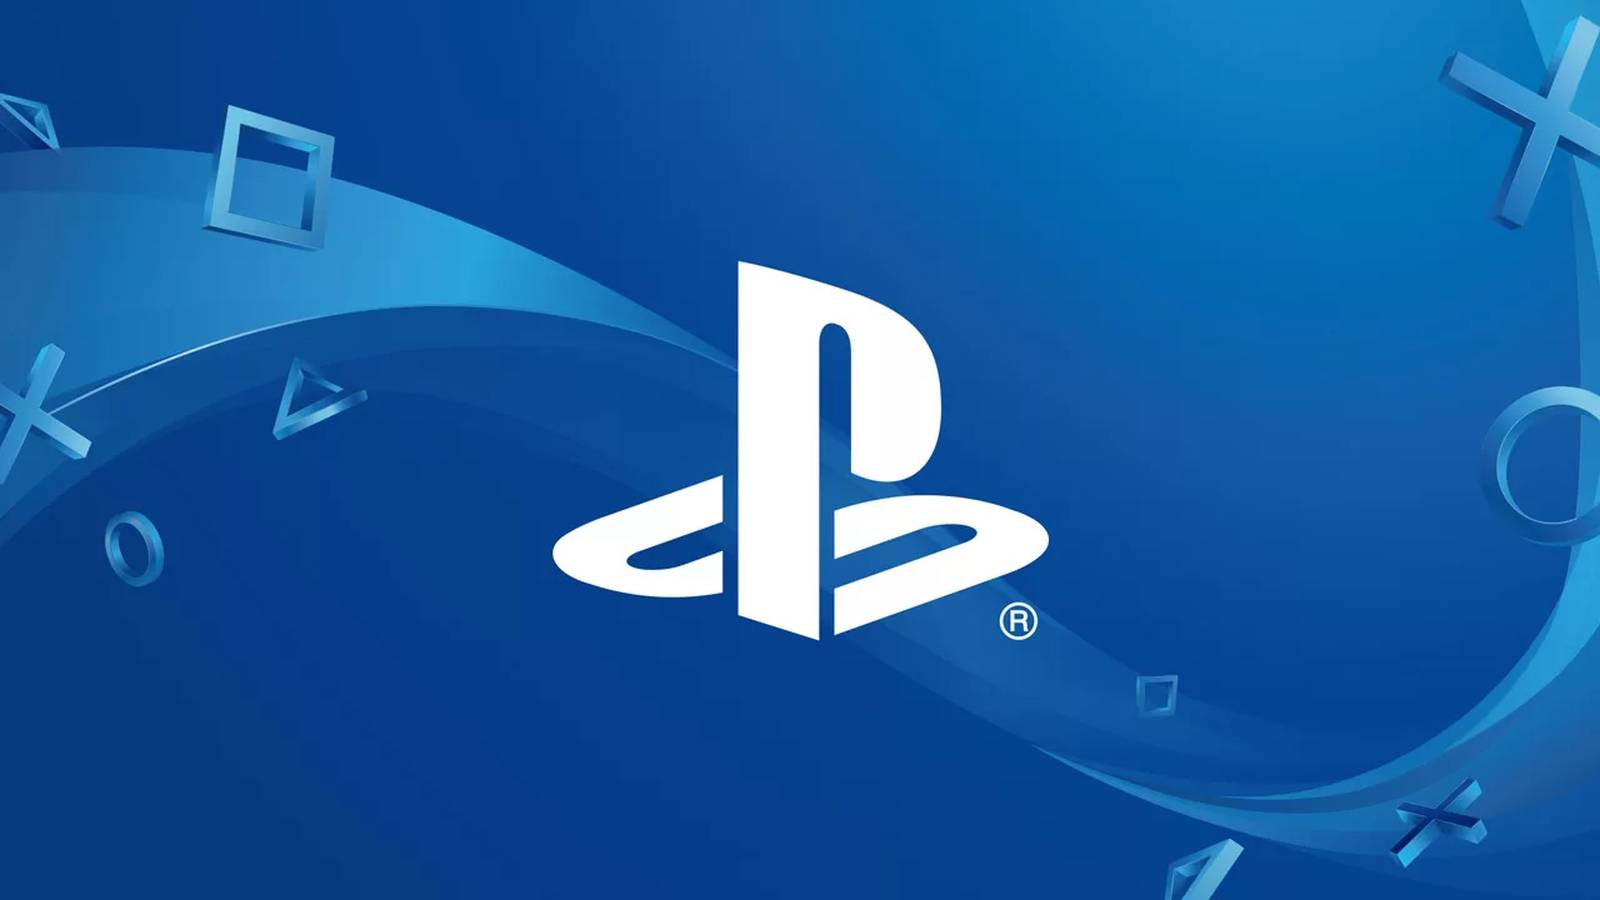 A ‘Major Distributor’ Is Hosting The Destination PlayStation Event, Freeing Up Sony For A Potential PS5 Reveal Event